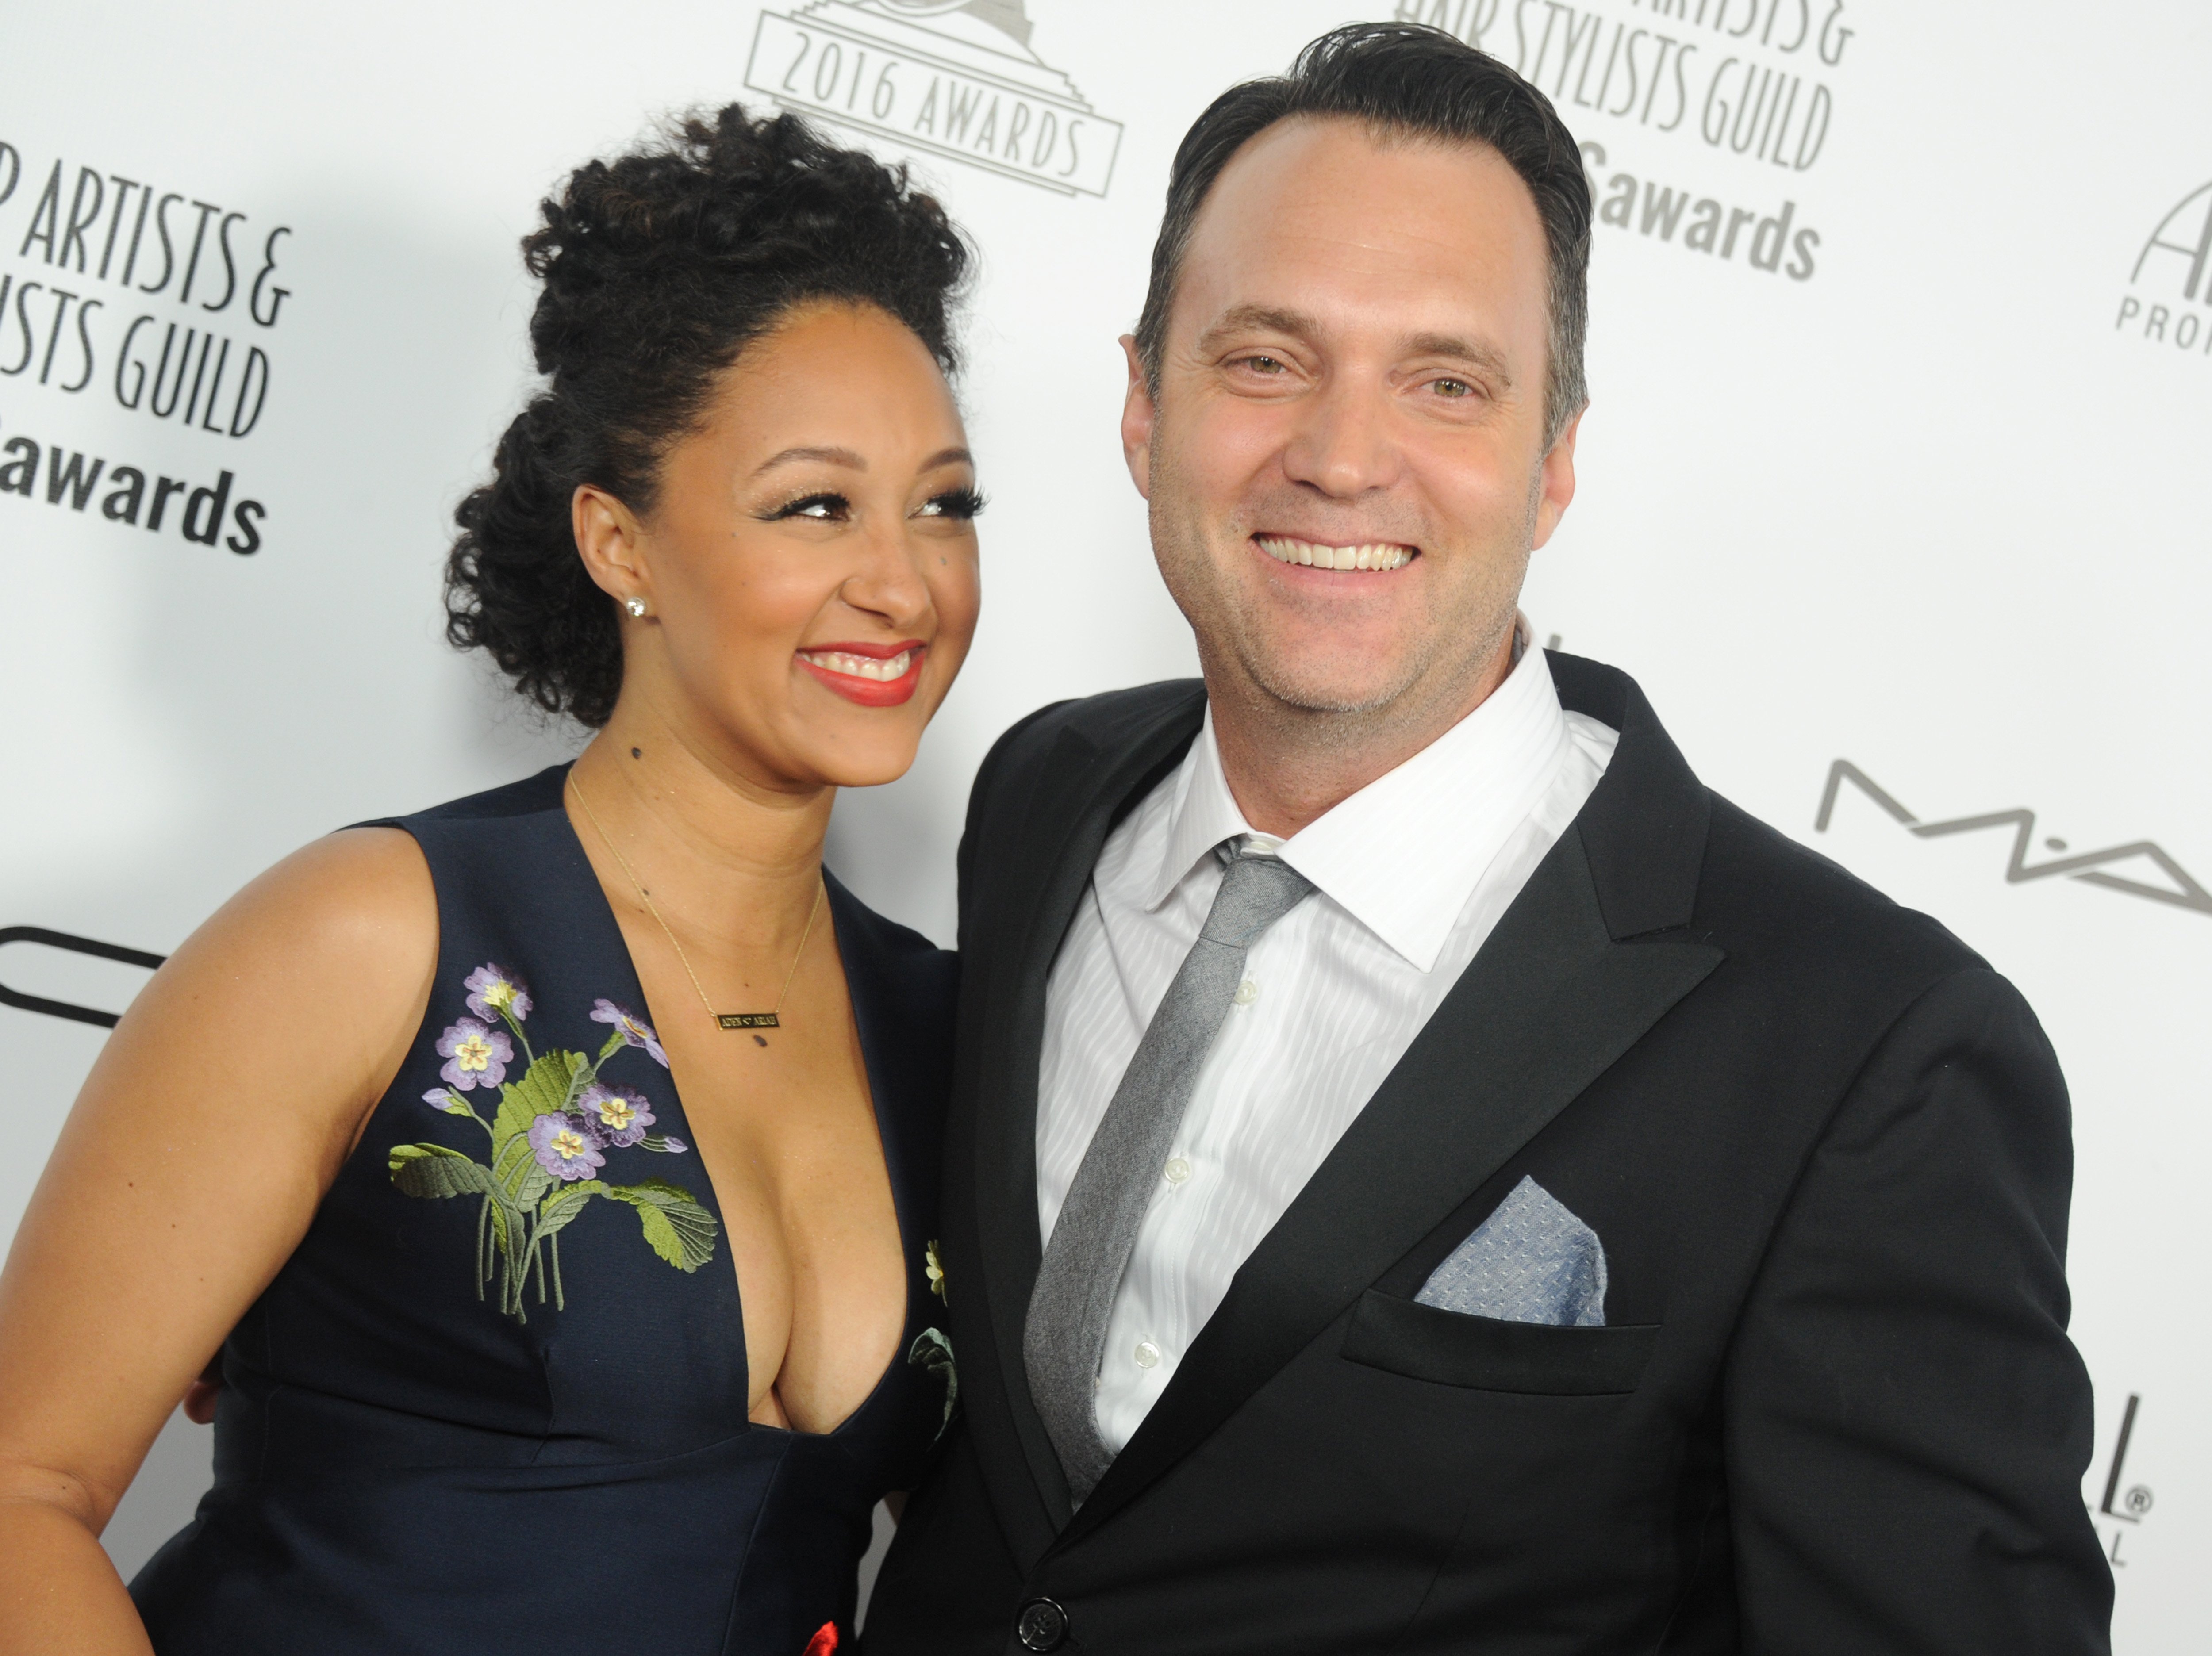 Tamera Mowry-Housley and Adam Housley at the Make-Up Artists And Hair Stylists Guild Awards at Paramount Studios on February 20, 2016 in Hollywood, California.| Source: Getty Images